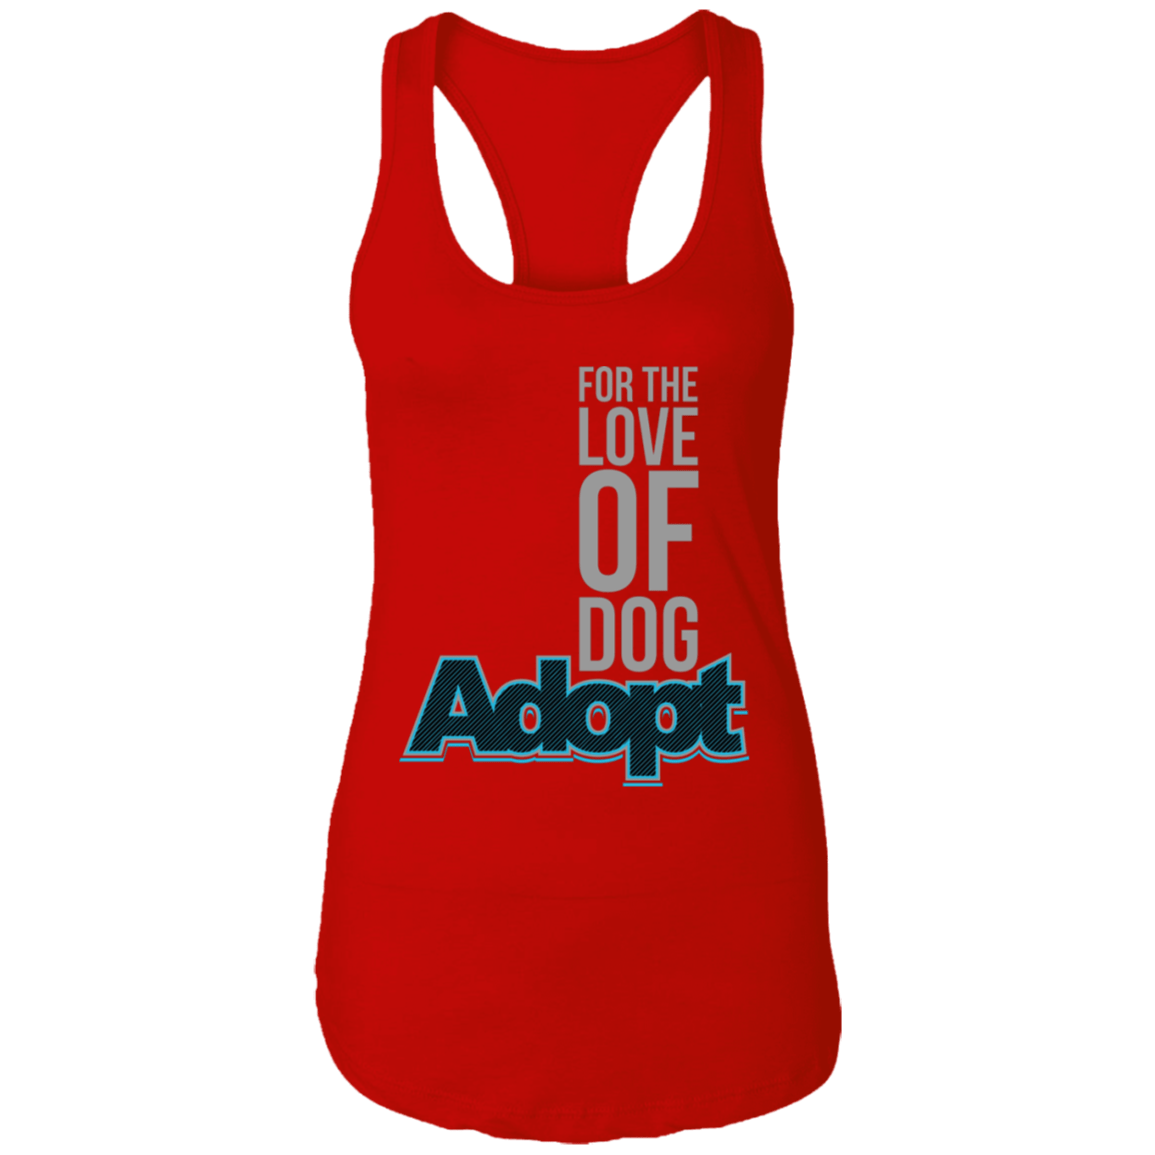 For The Love Of Dog Adopt - Ladies Racer Back Tank.